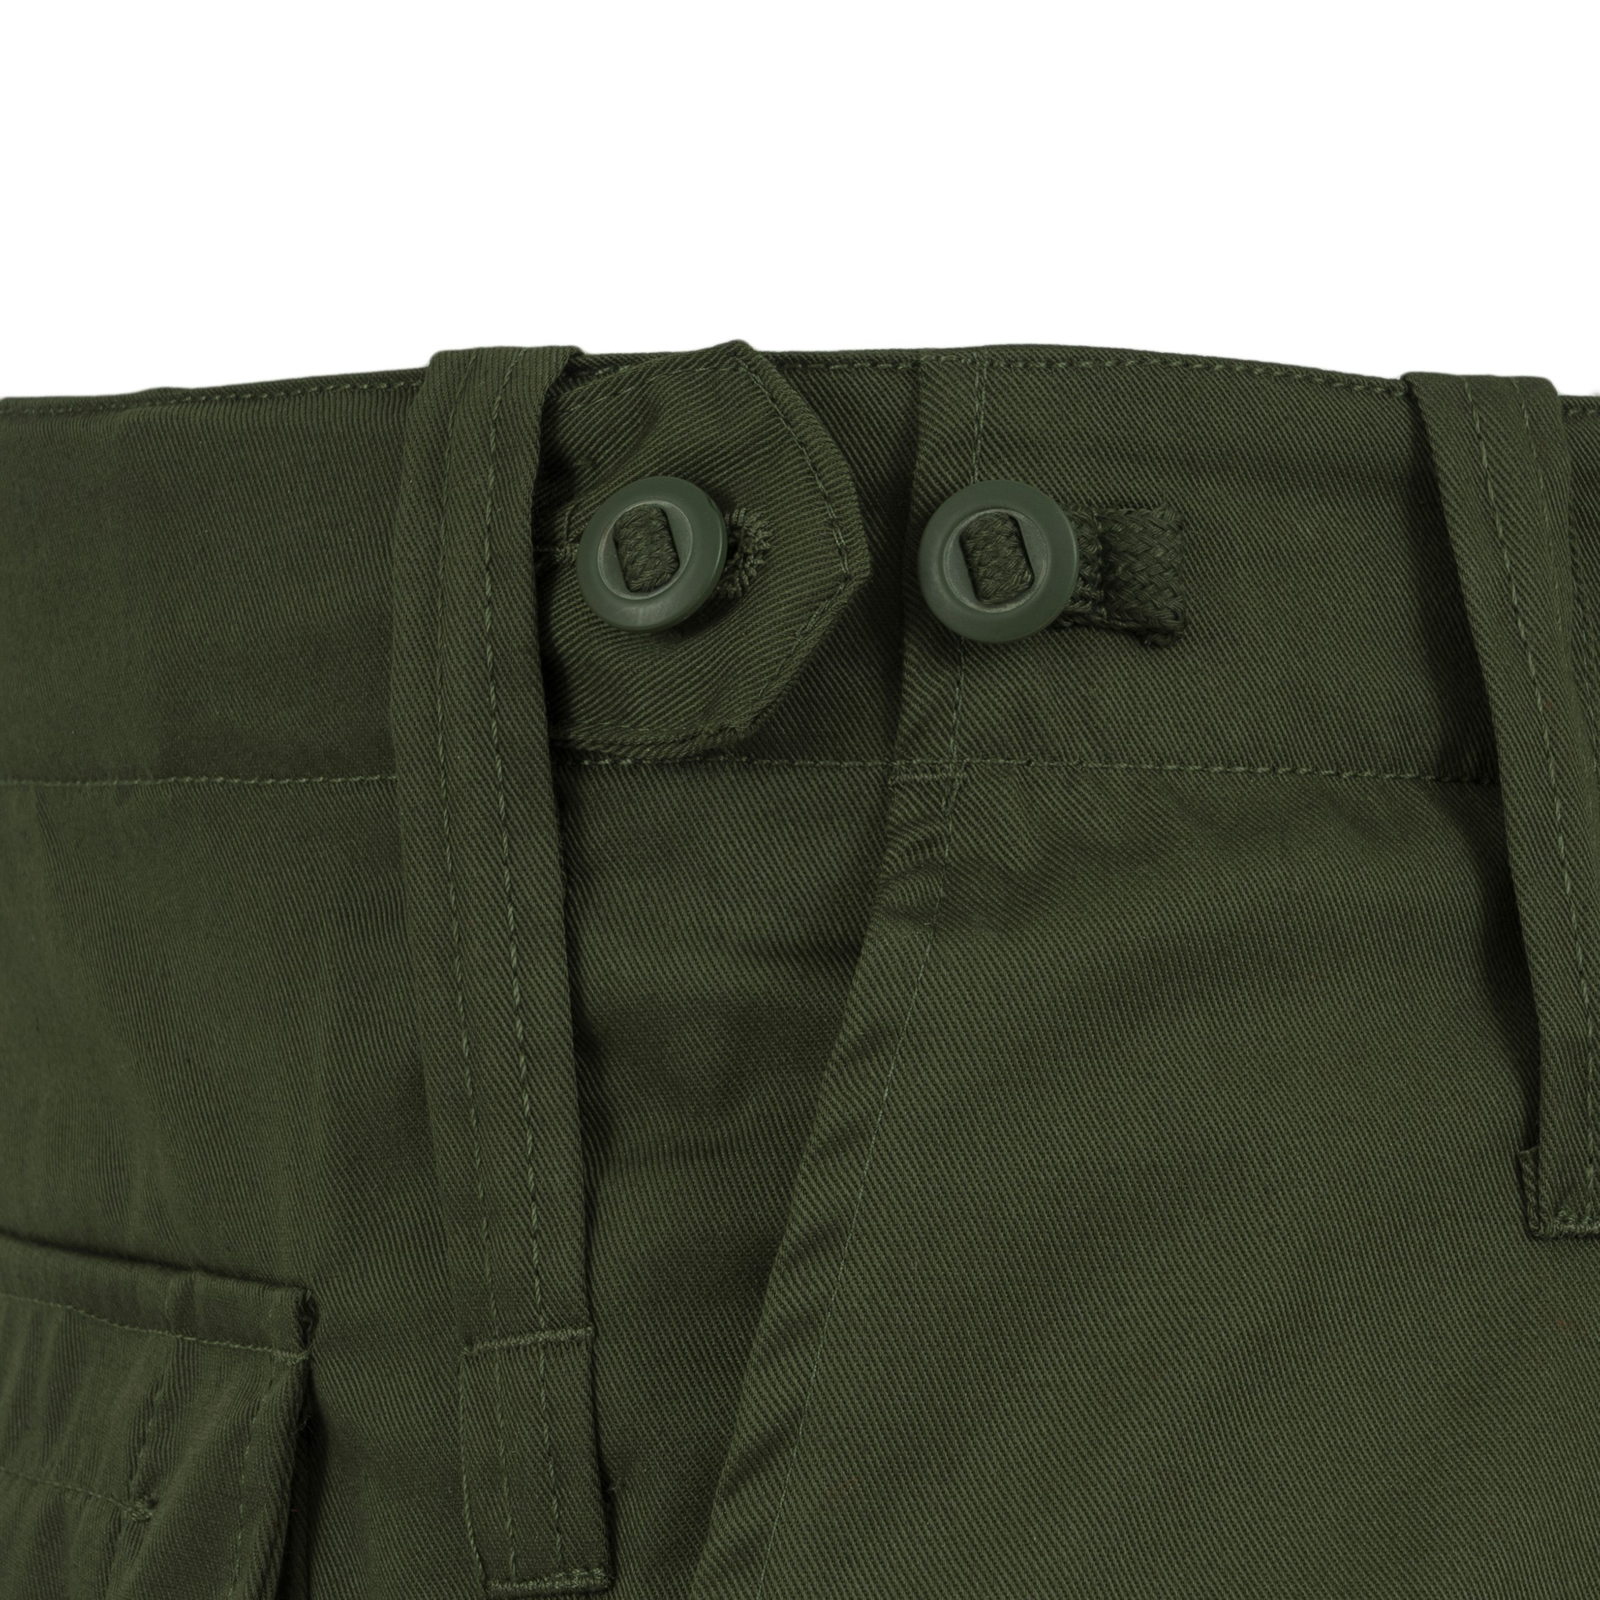 Highlander Elite Trousers Ripstop Military Army Camouflage Fishing HMTC  Camo | eBay